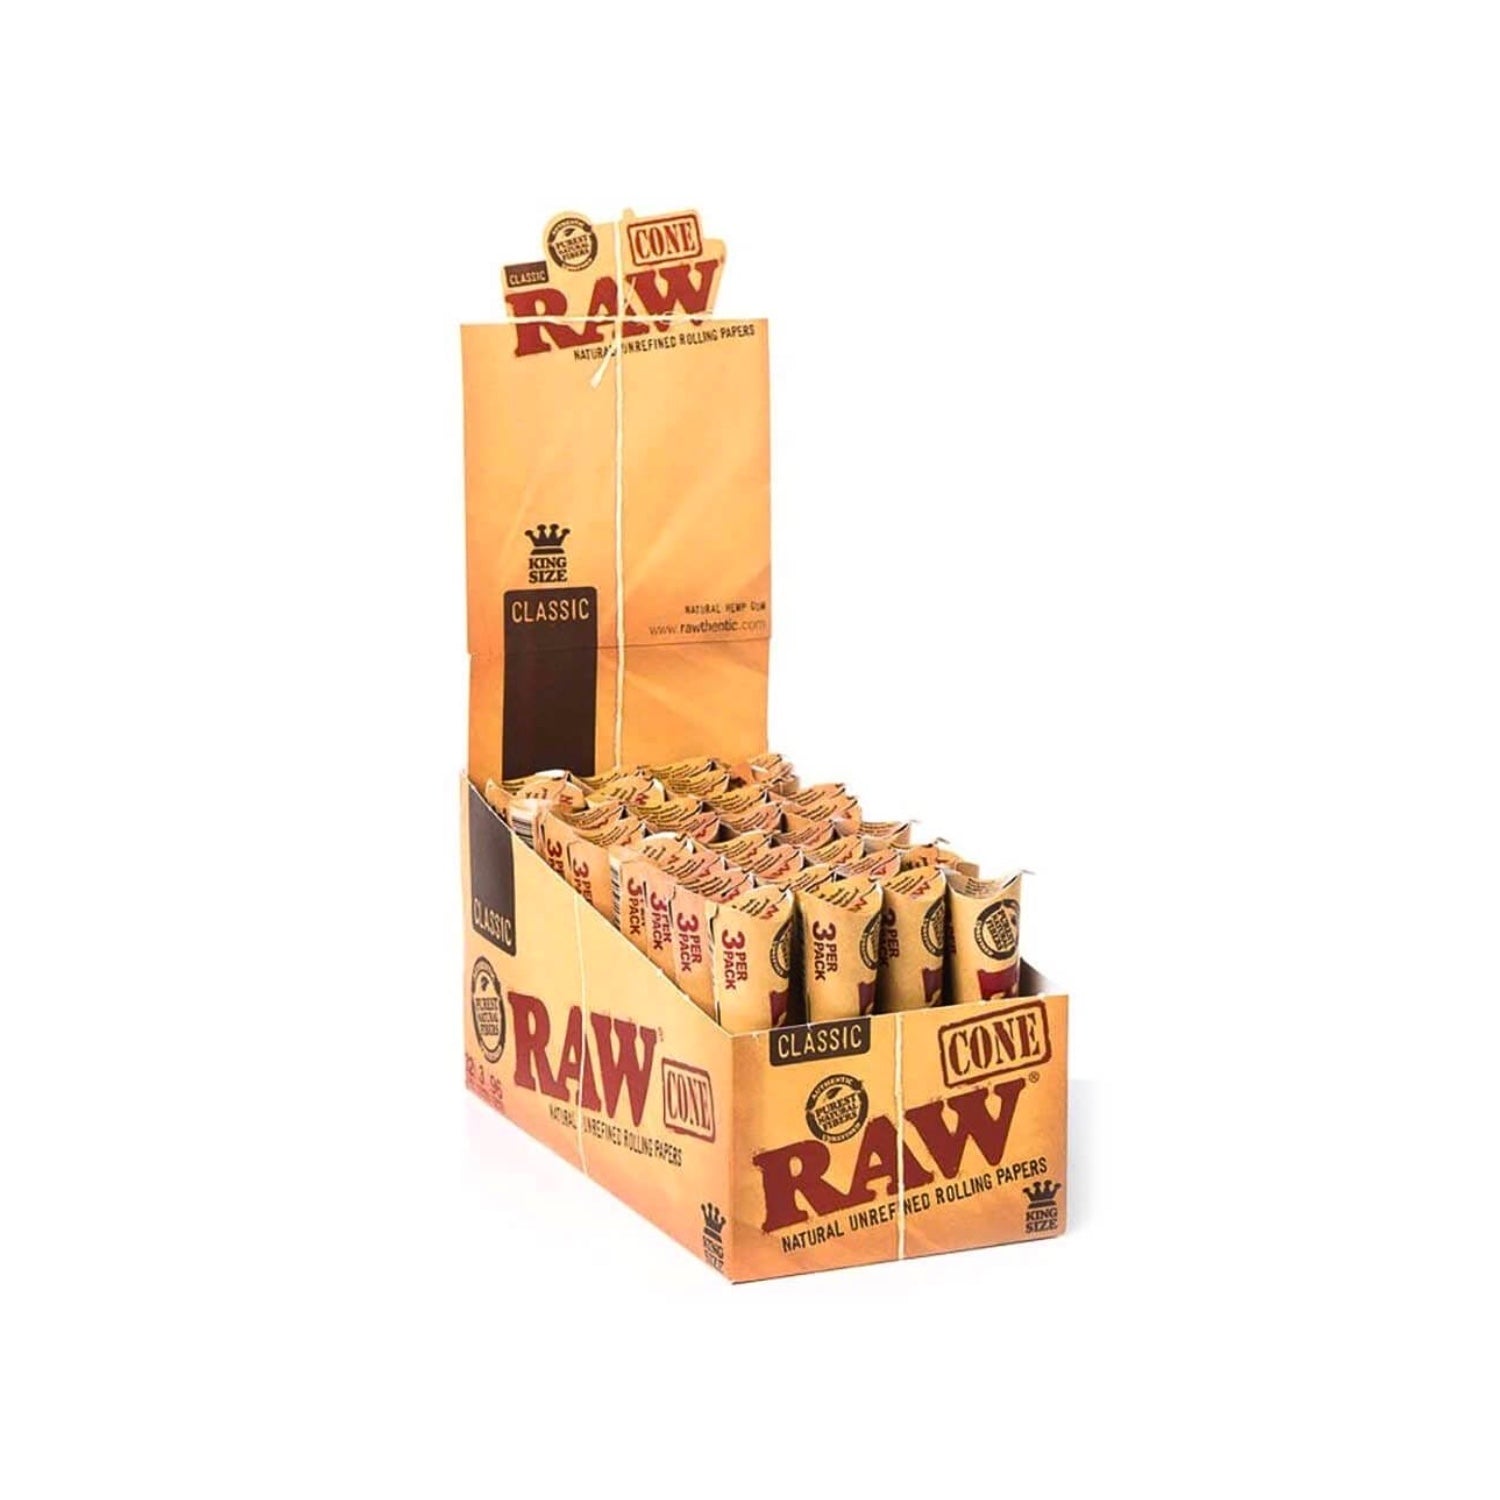 Raw King Size Cones Display